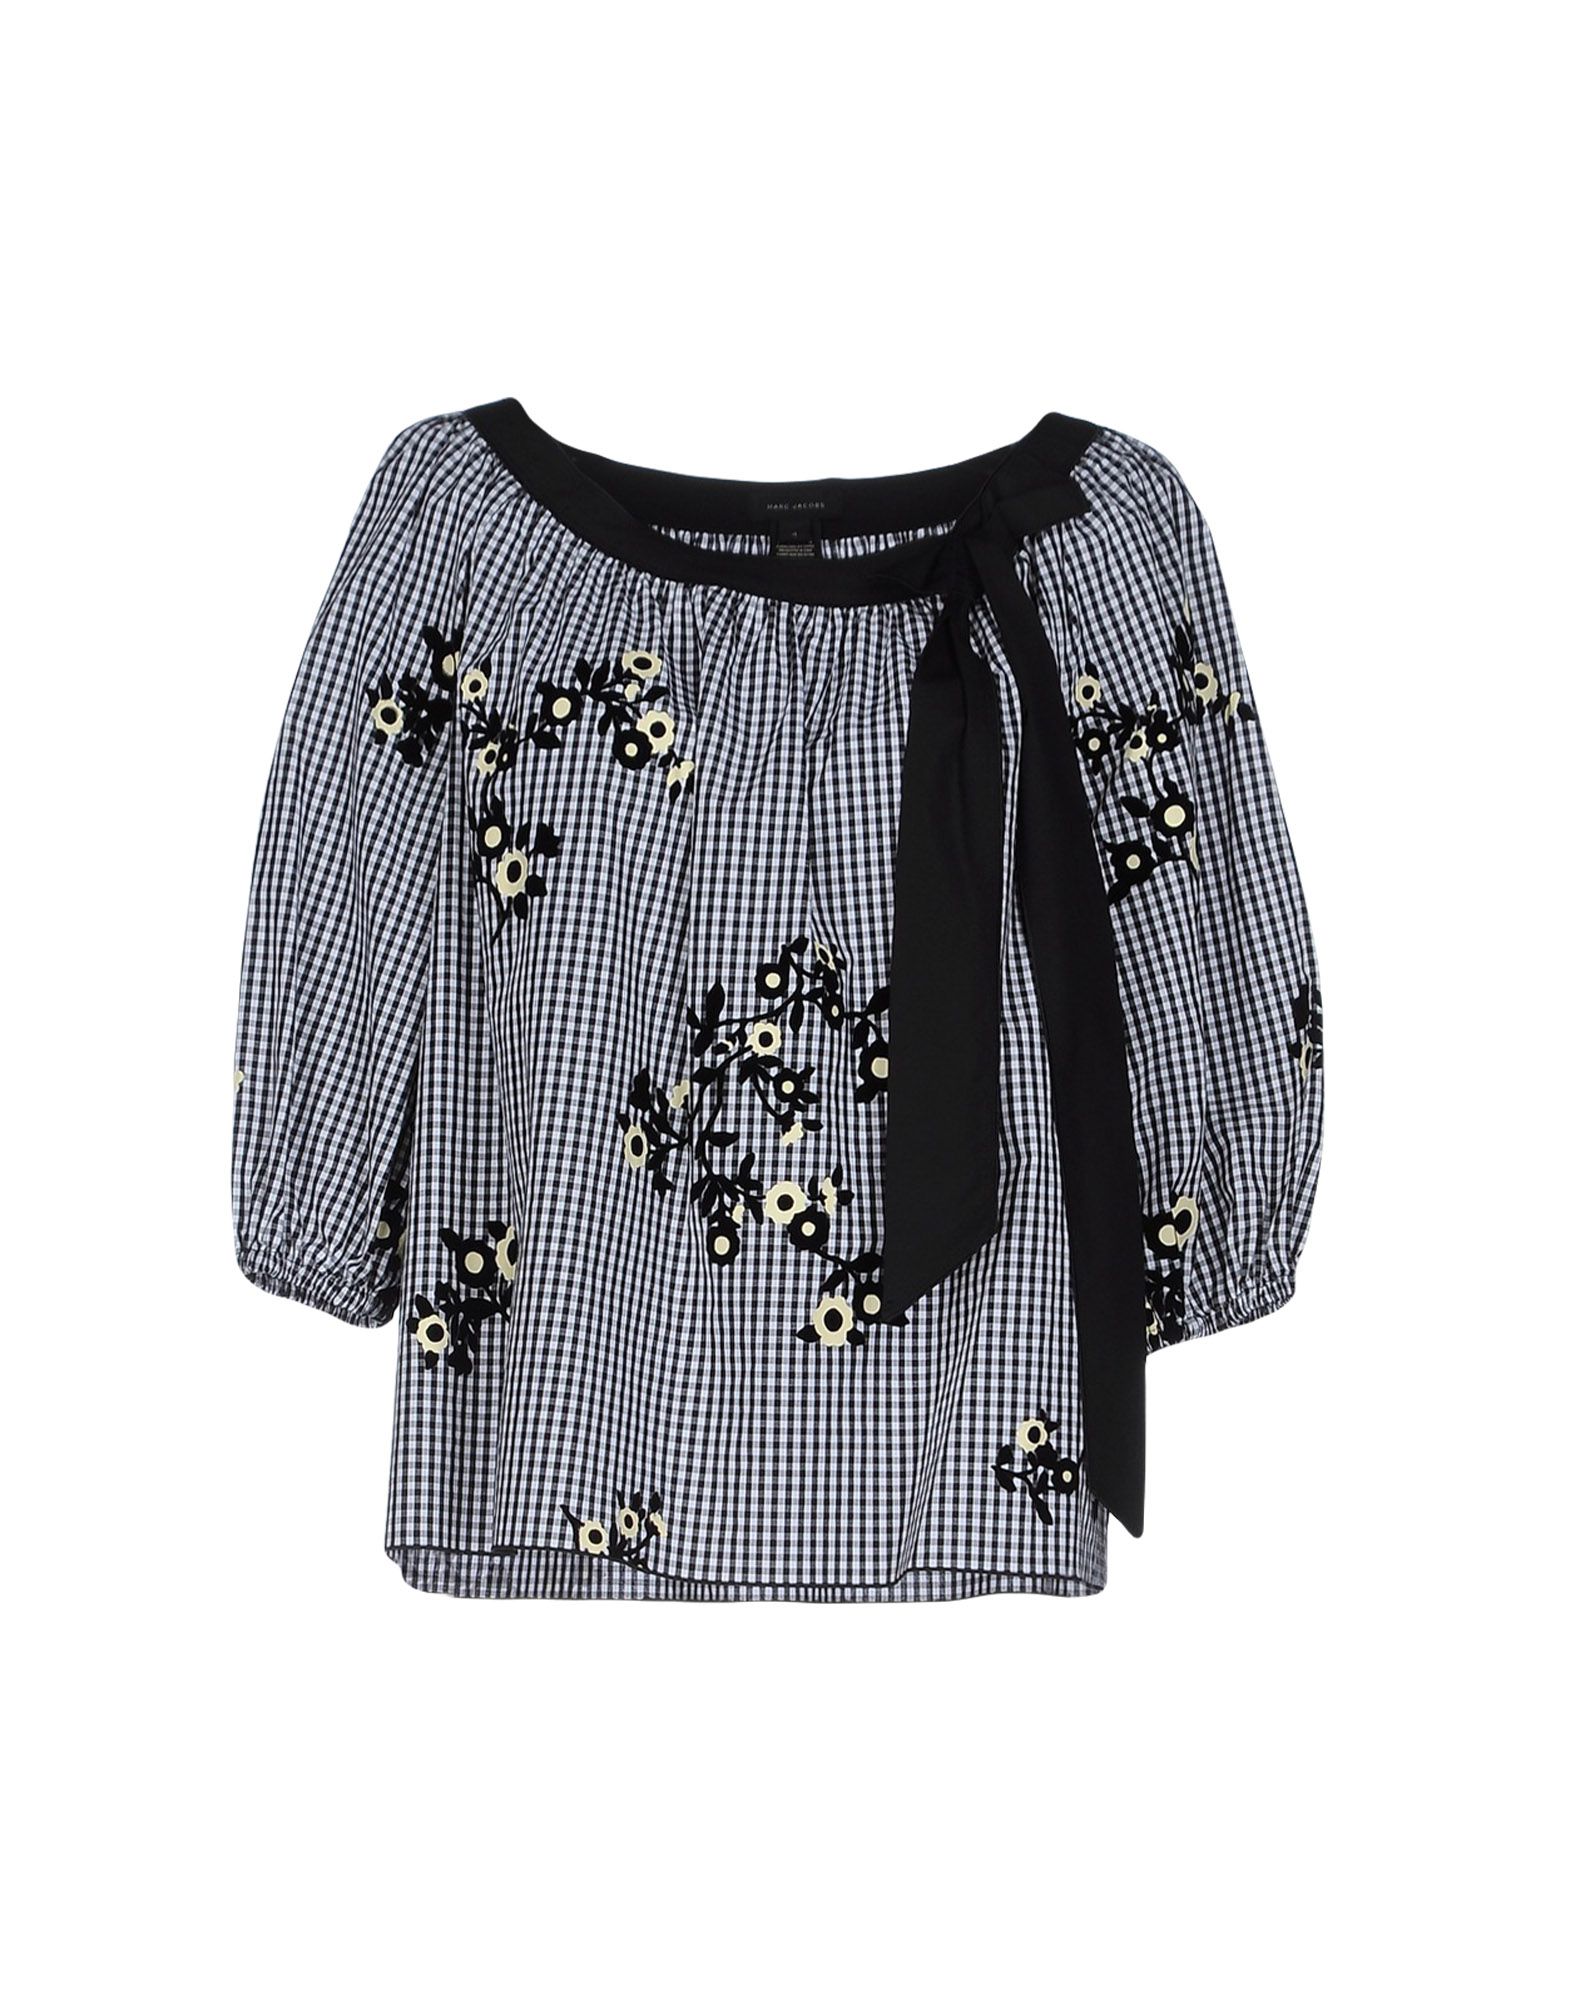 MARC JACOBS BLOUSES,38642044OS 3